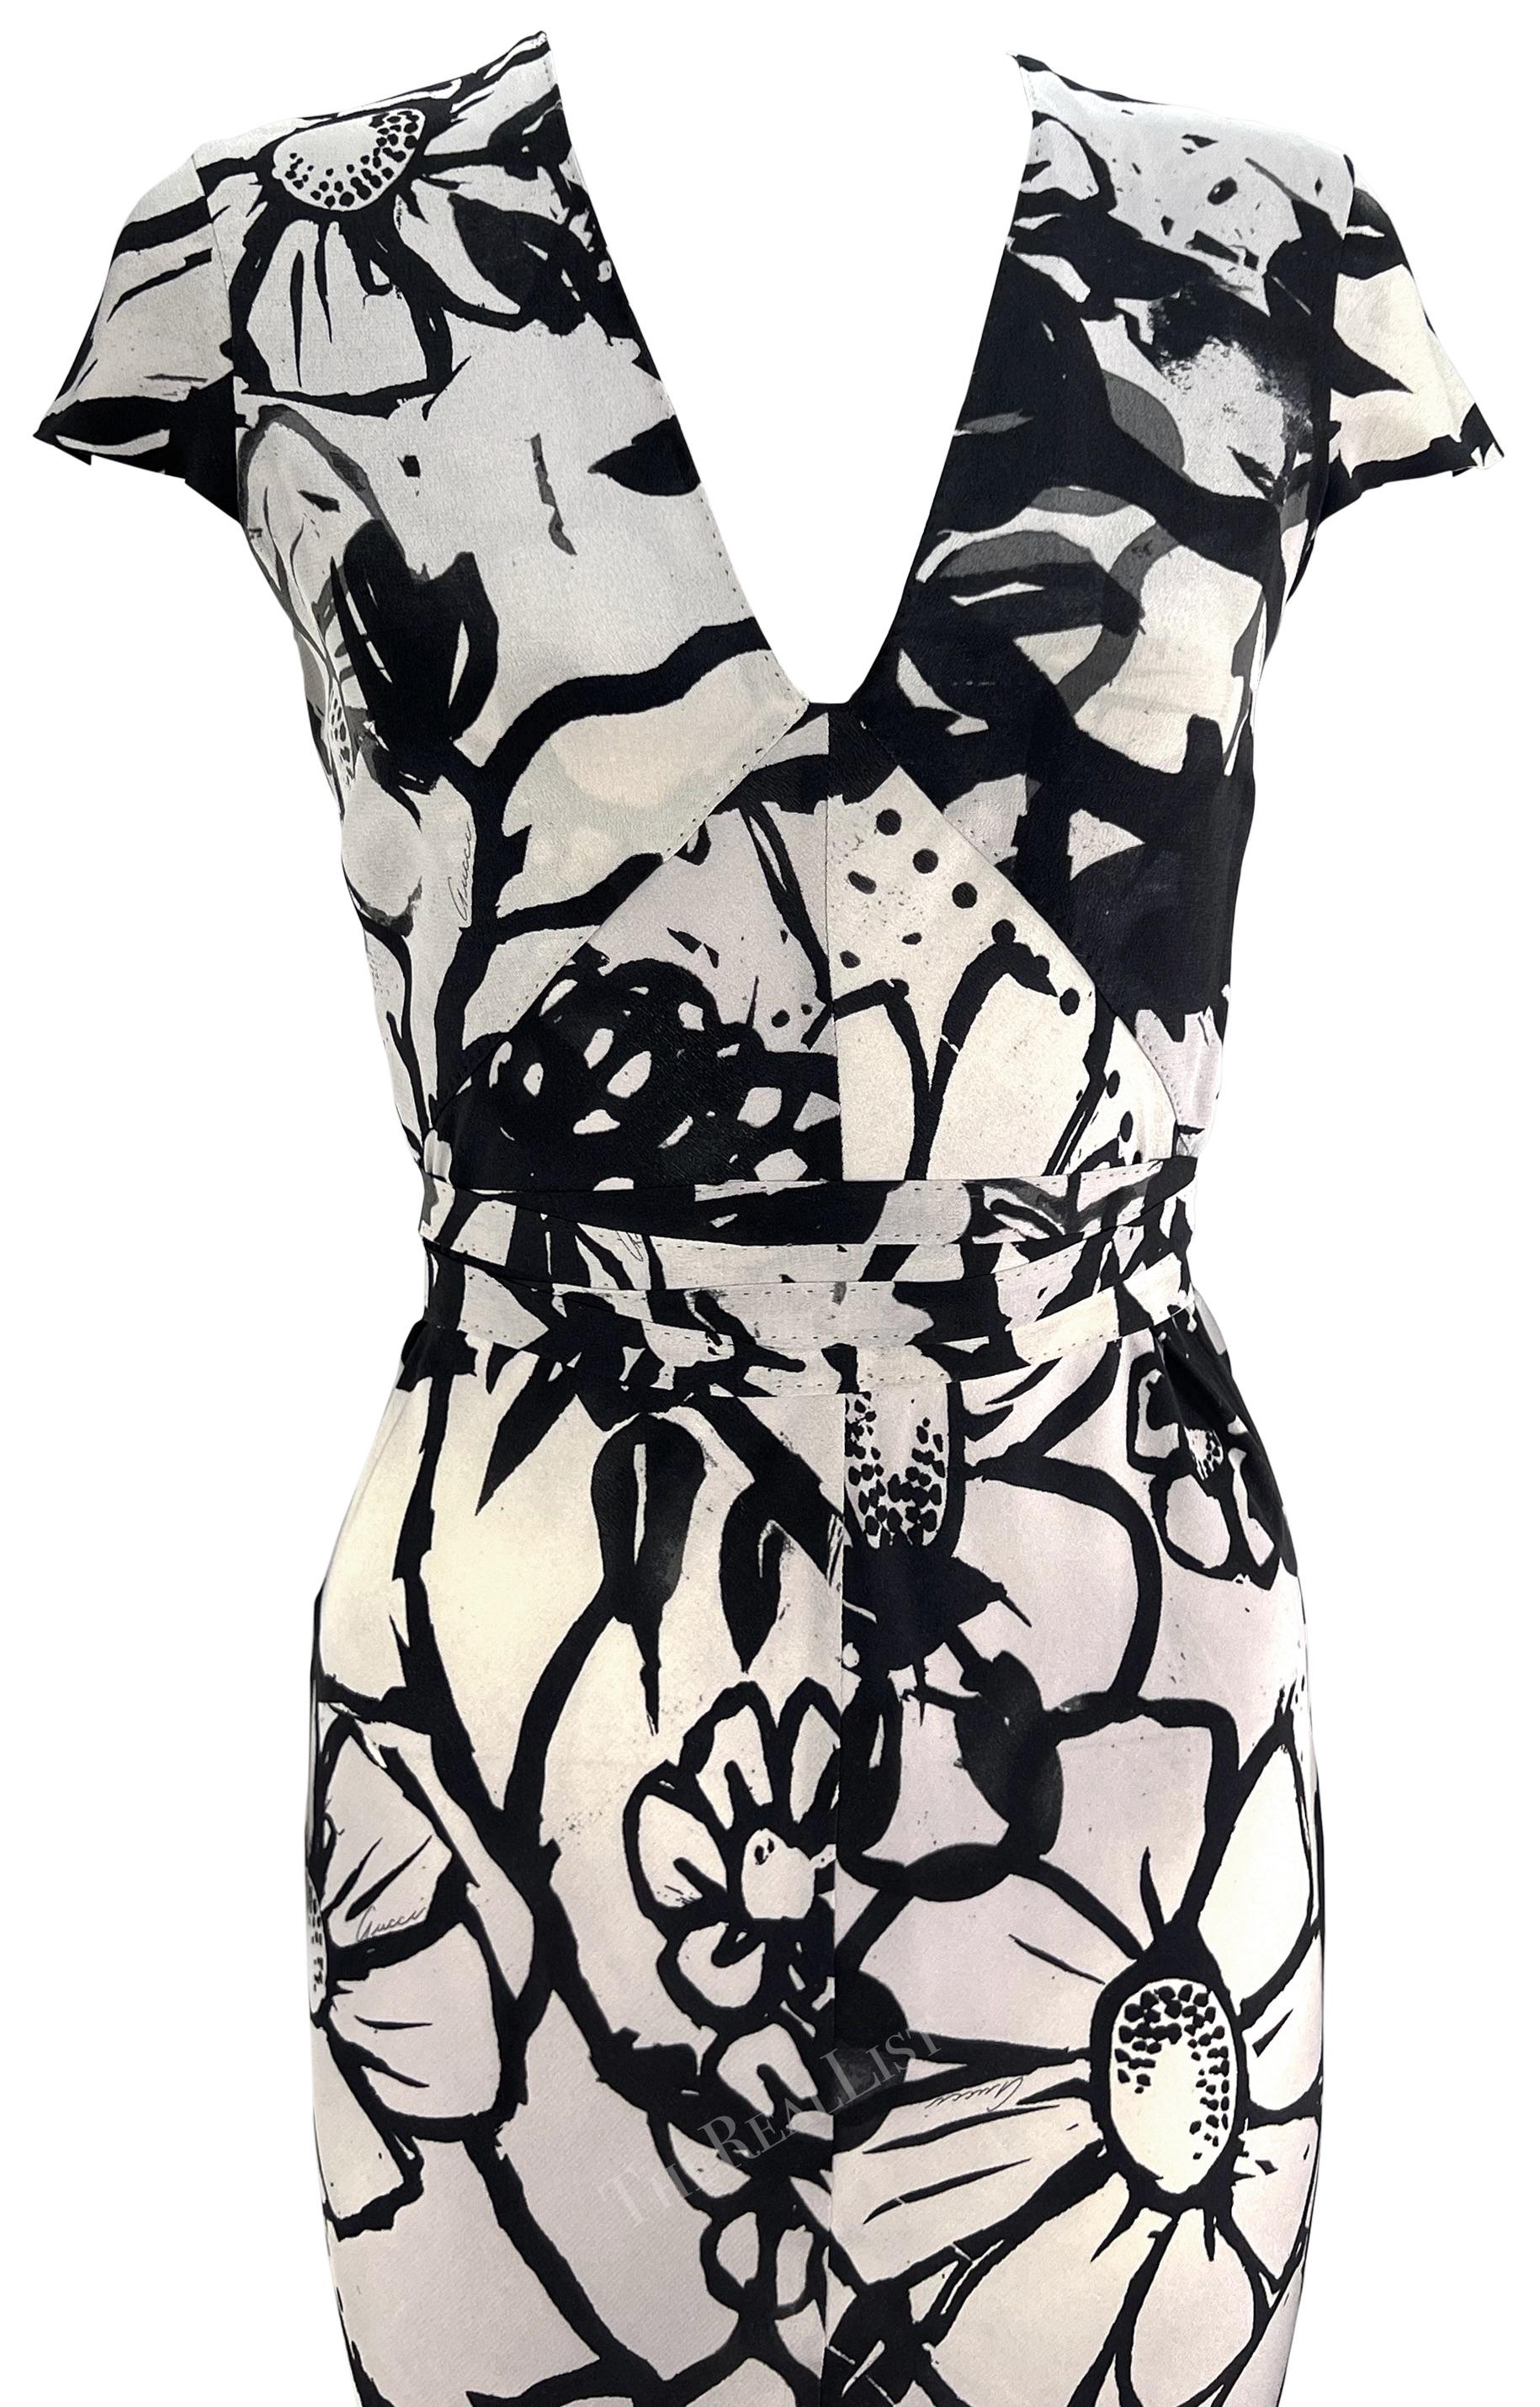 Presenting a chic grey floral Gucci dress, designed by Tom Ford. From 2003, this dress is covered in a bold abstract floral print atop a grey background. This fabulous knee-length dress features petite petal sleeves, a v-neckline, and a tie belt